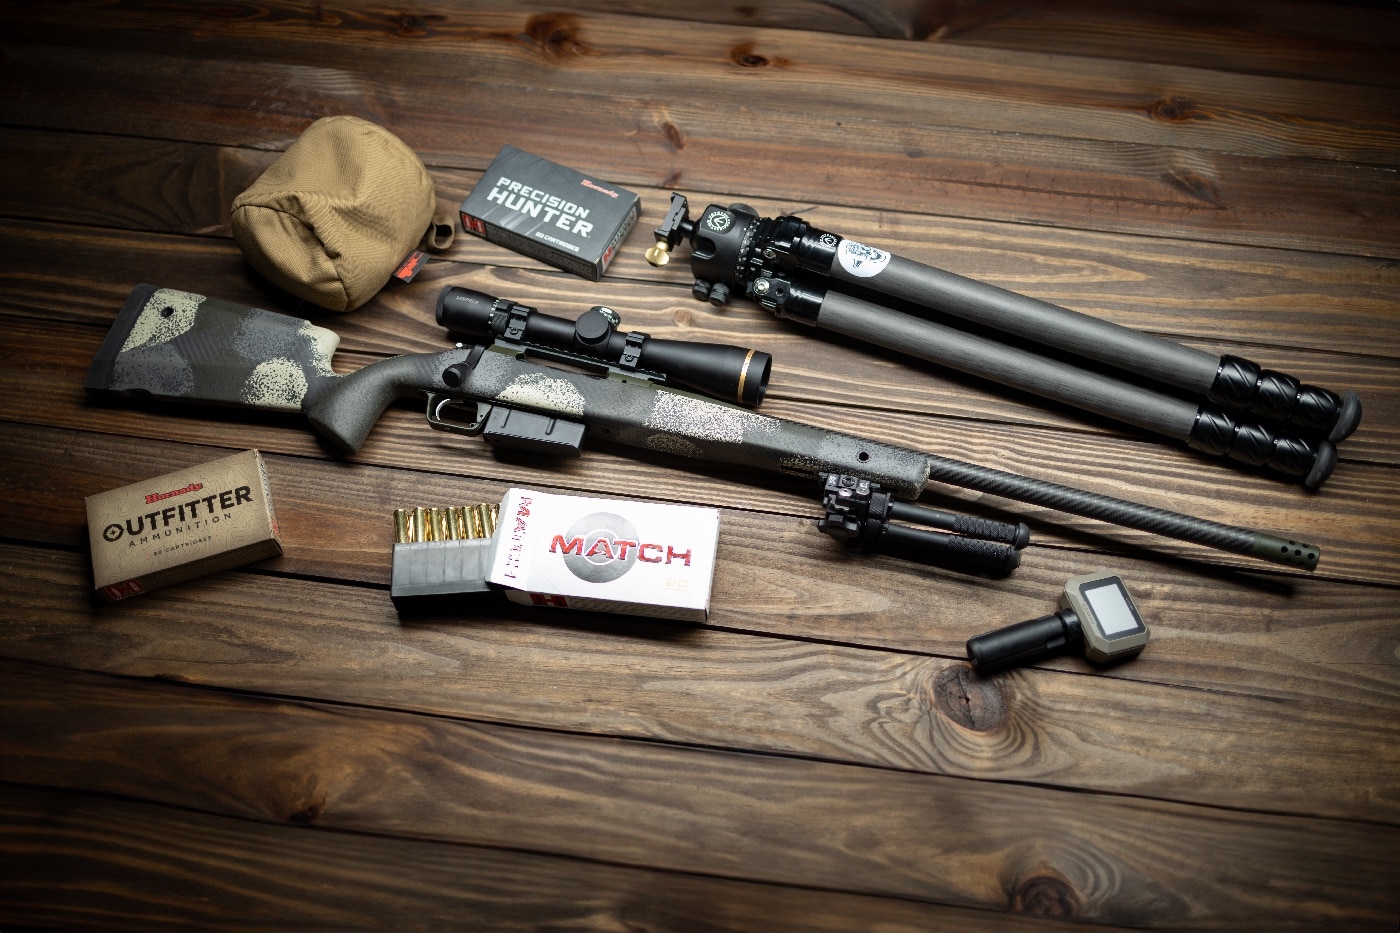 In this photo we see the new Springfield Armory Model 2020 Long Action Waypoint rifle and shootiung accessories including ammo and a tripod. The new gun is available in .270 Winchester, .30-06 Springfield, 7mm Remington Magnum, .300 Winchester Magnum, 7mm PRC, .300 PRC cartridges ammunition.